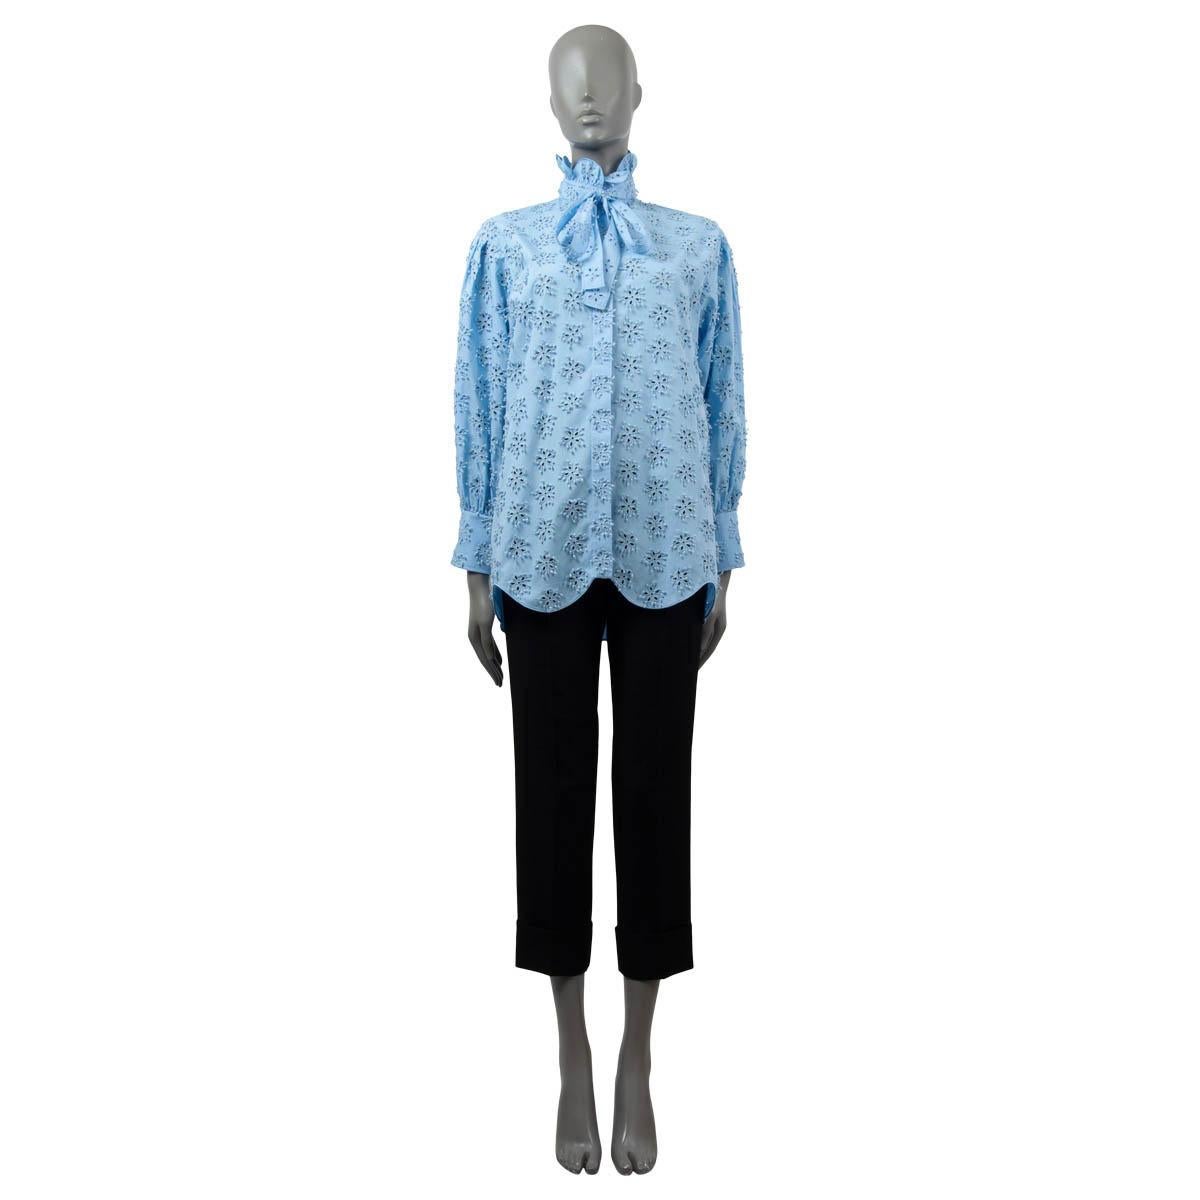 100% authentic Valentino oversized pussy-bow blouse in cornflower blue cotton (with 9% polyester). Featuring Sangallo floral embroidery on the front and sleeves and a high-neck. Relaxed fit. Closes with concealed buttons on the front. Has been worn